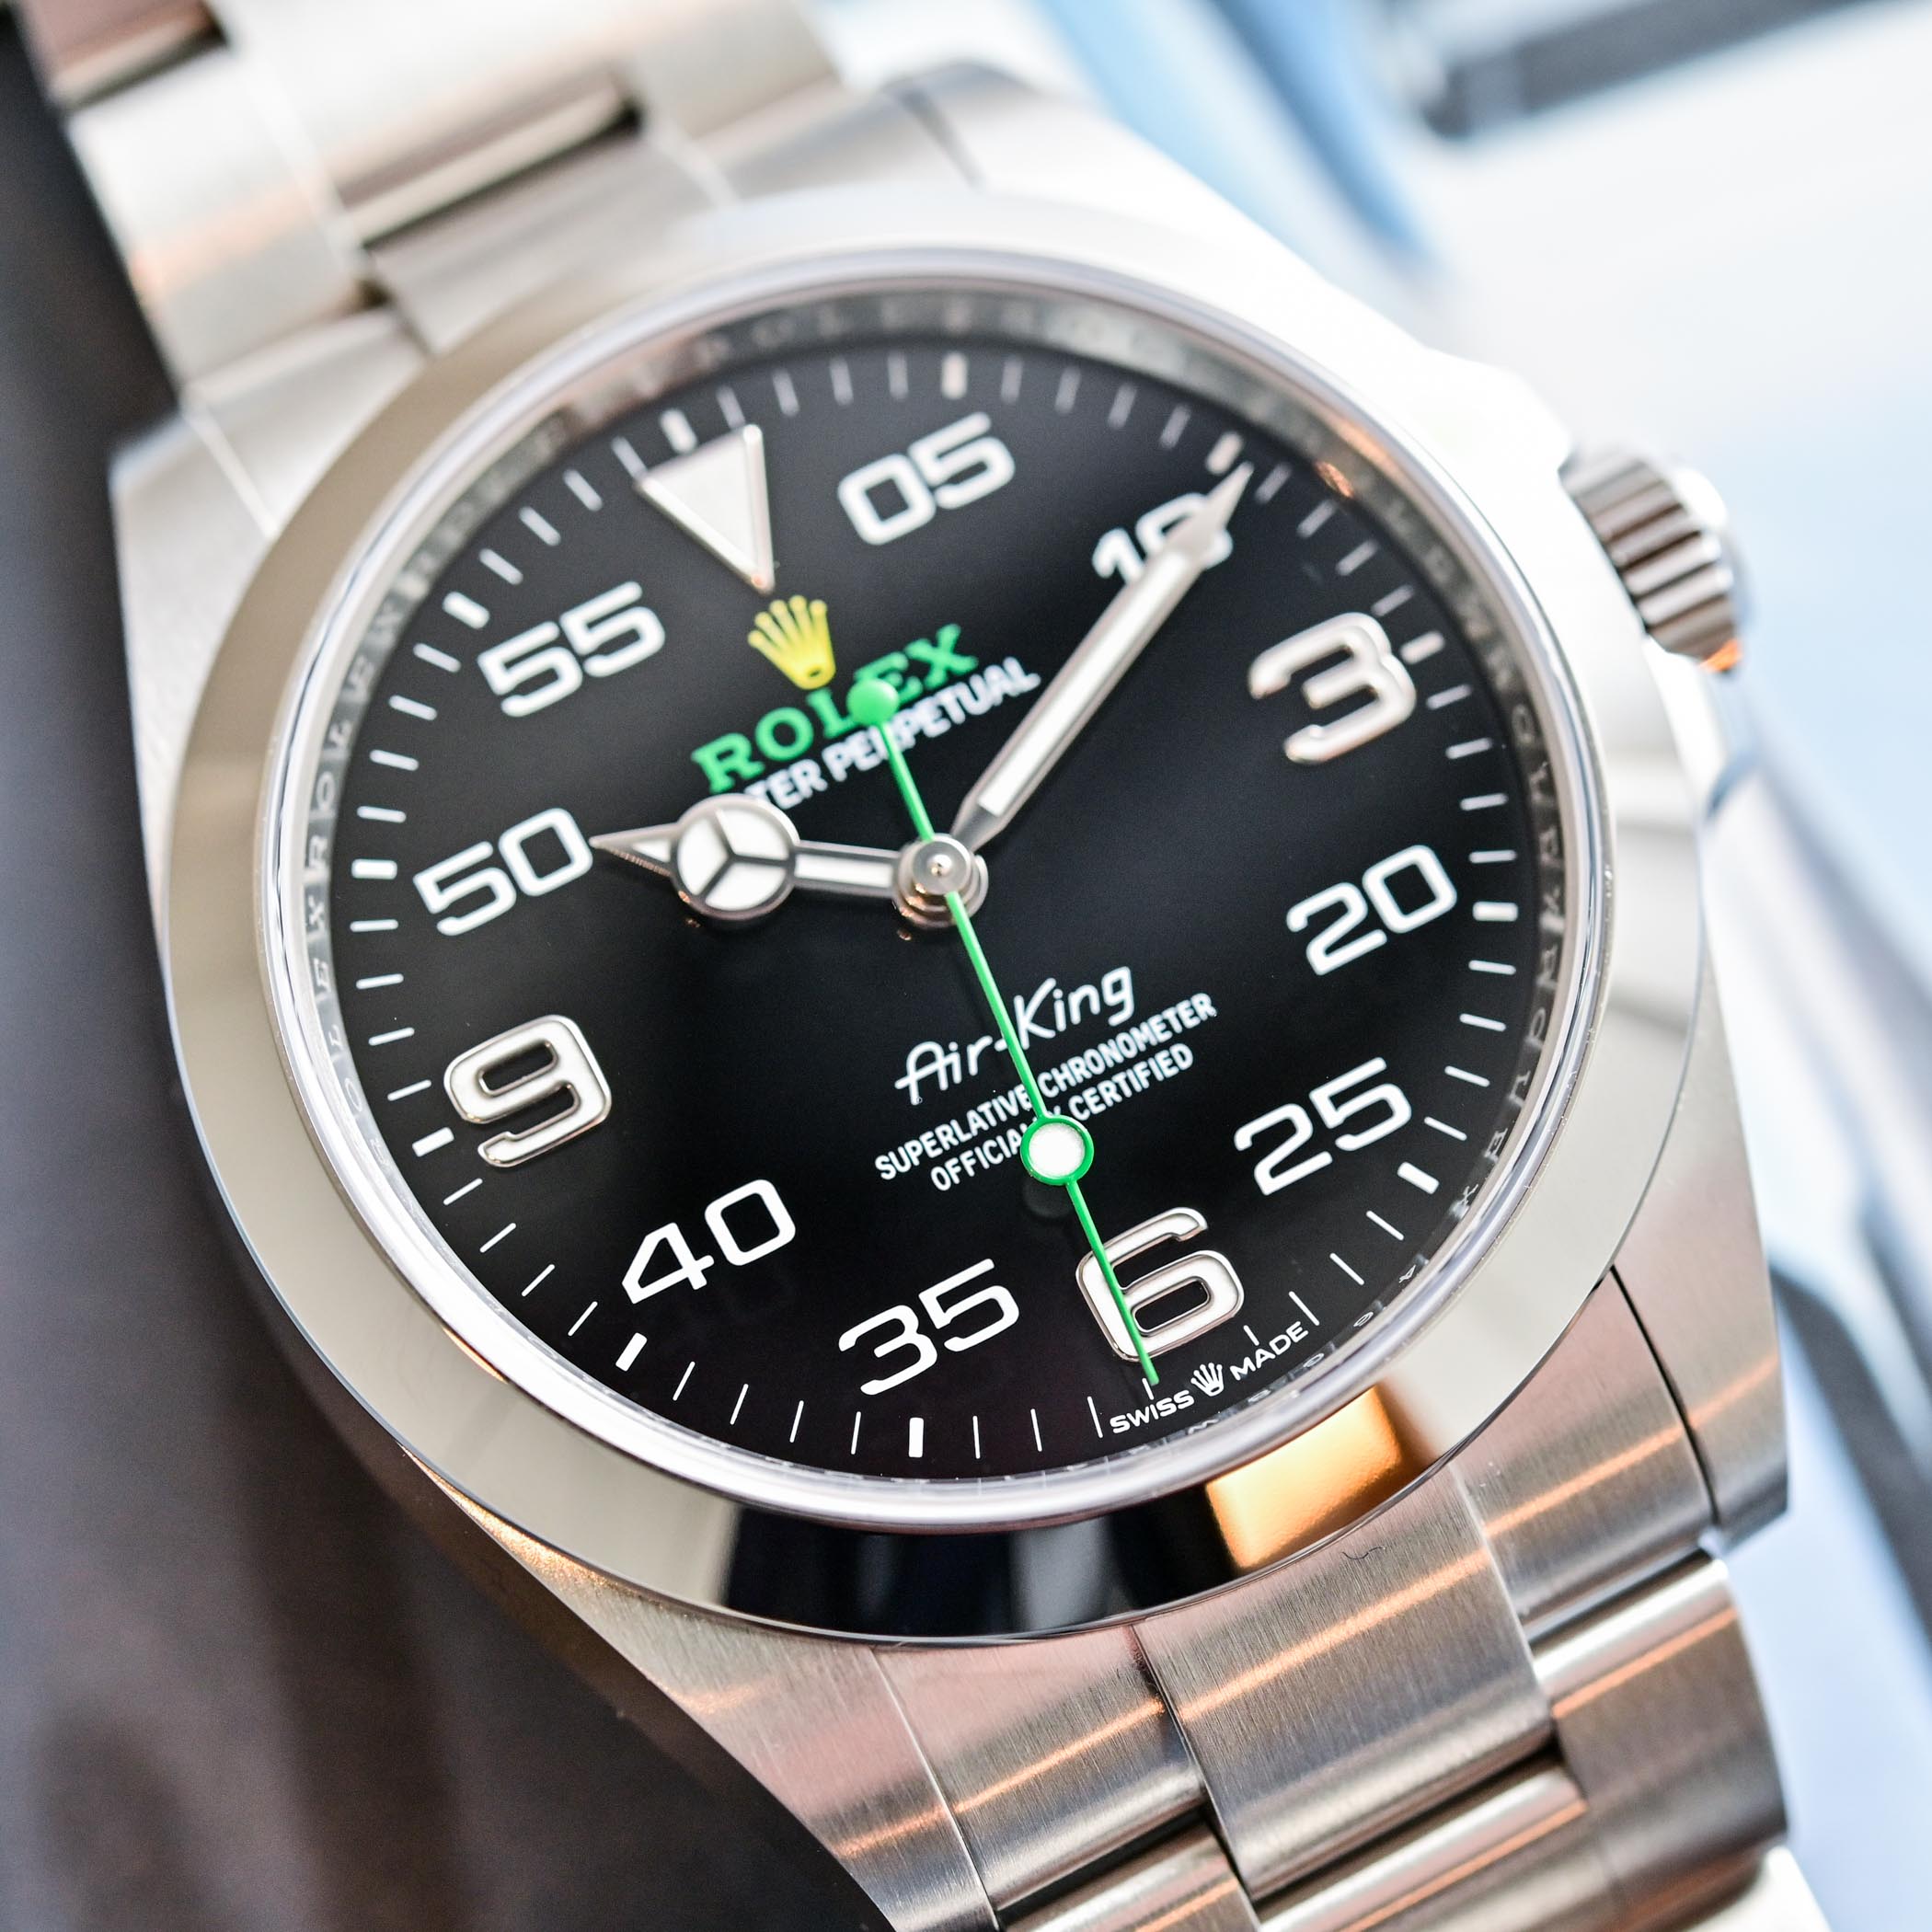 Rolex Oyster Perpetual Air King 126900 - hands-on - 2